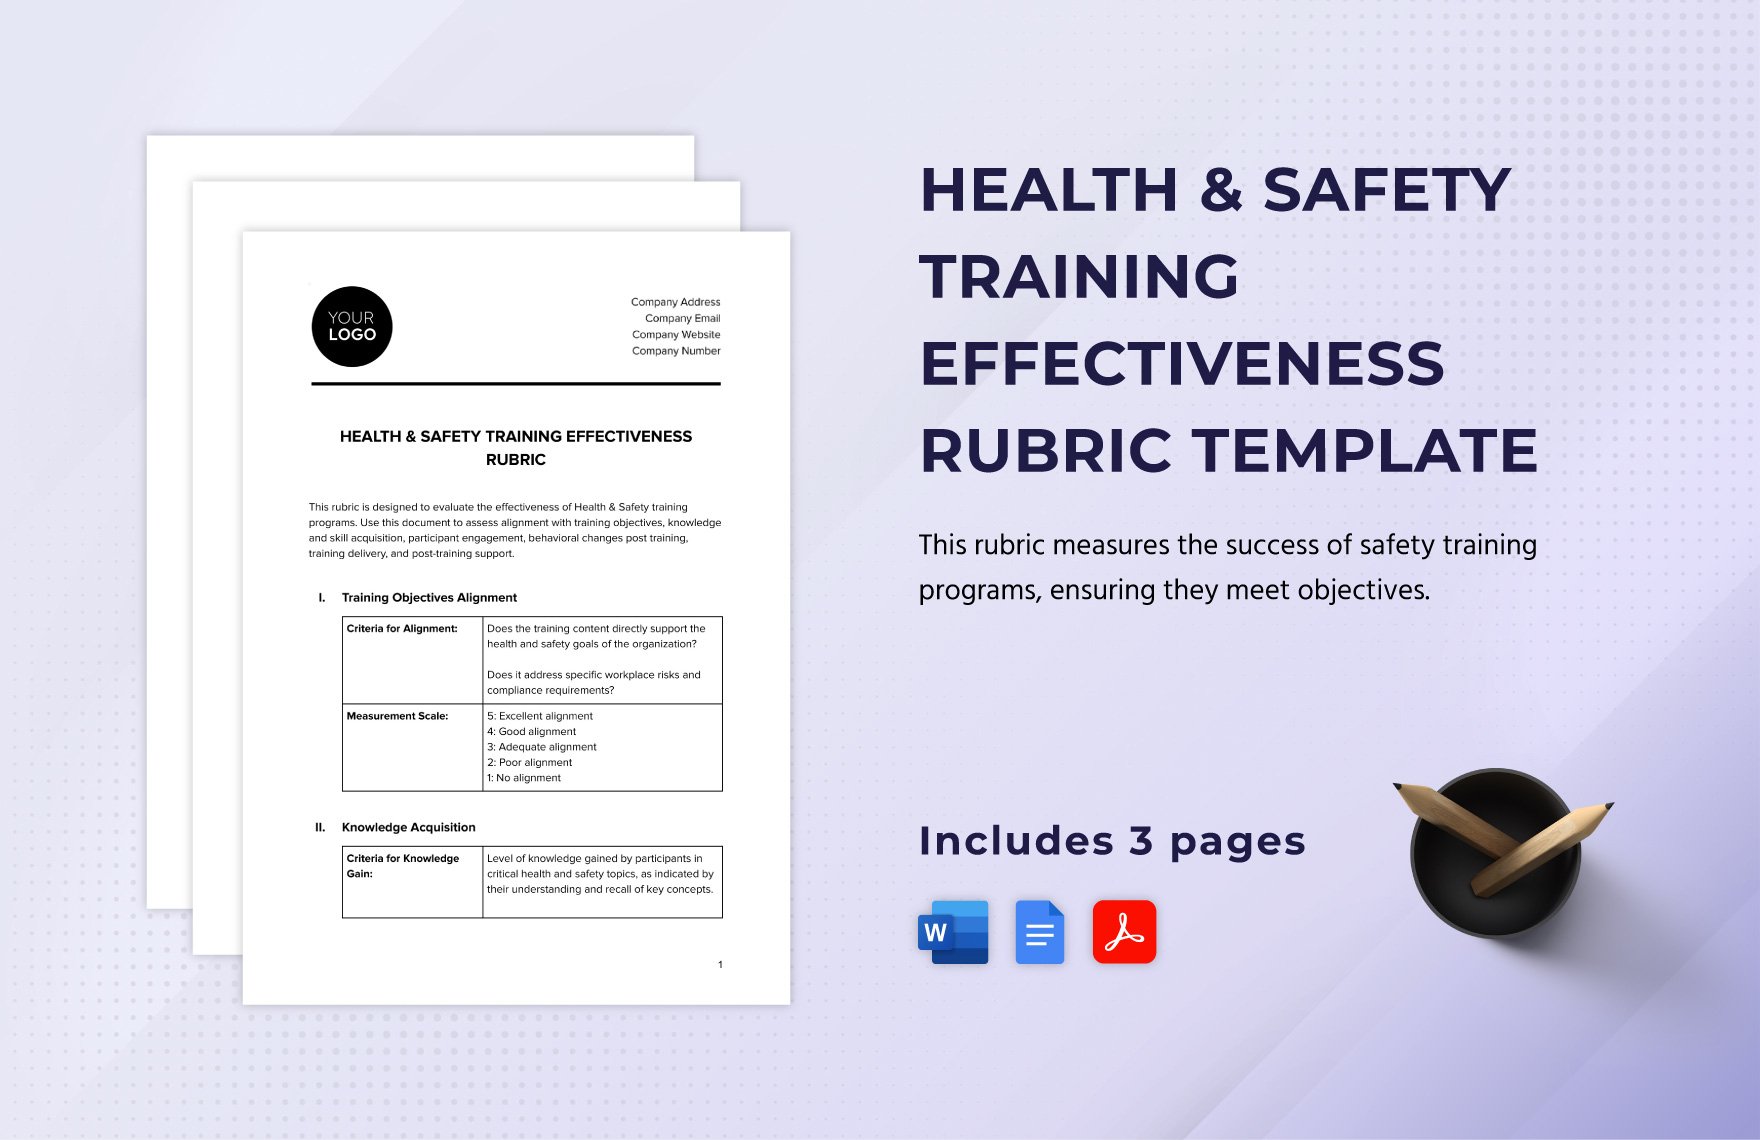 Health & Safety Training Effectiveness Rubric Template in Word, Google Docs, PDF